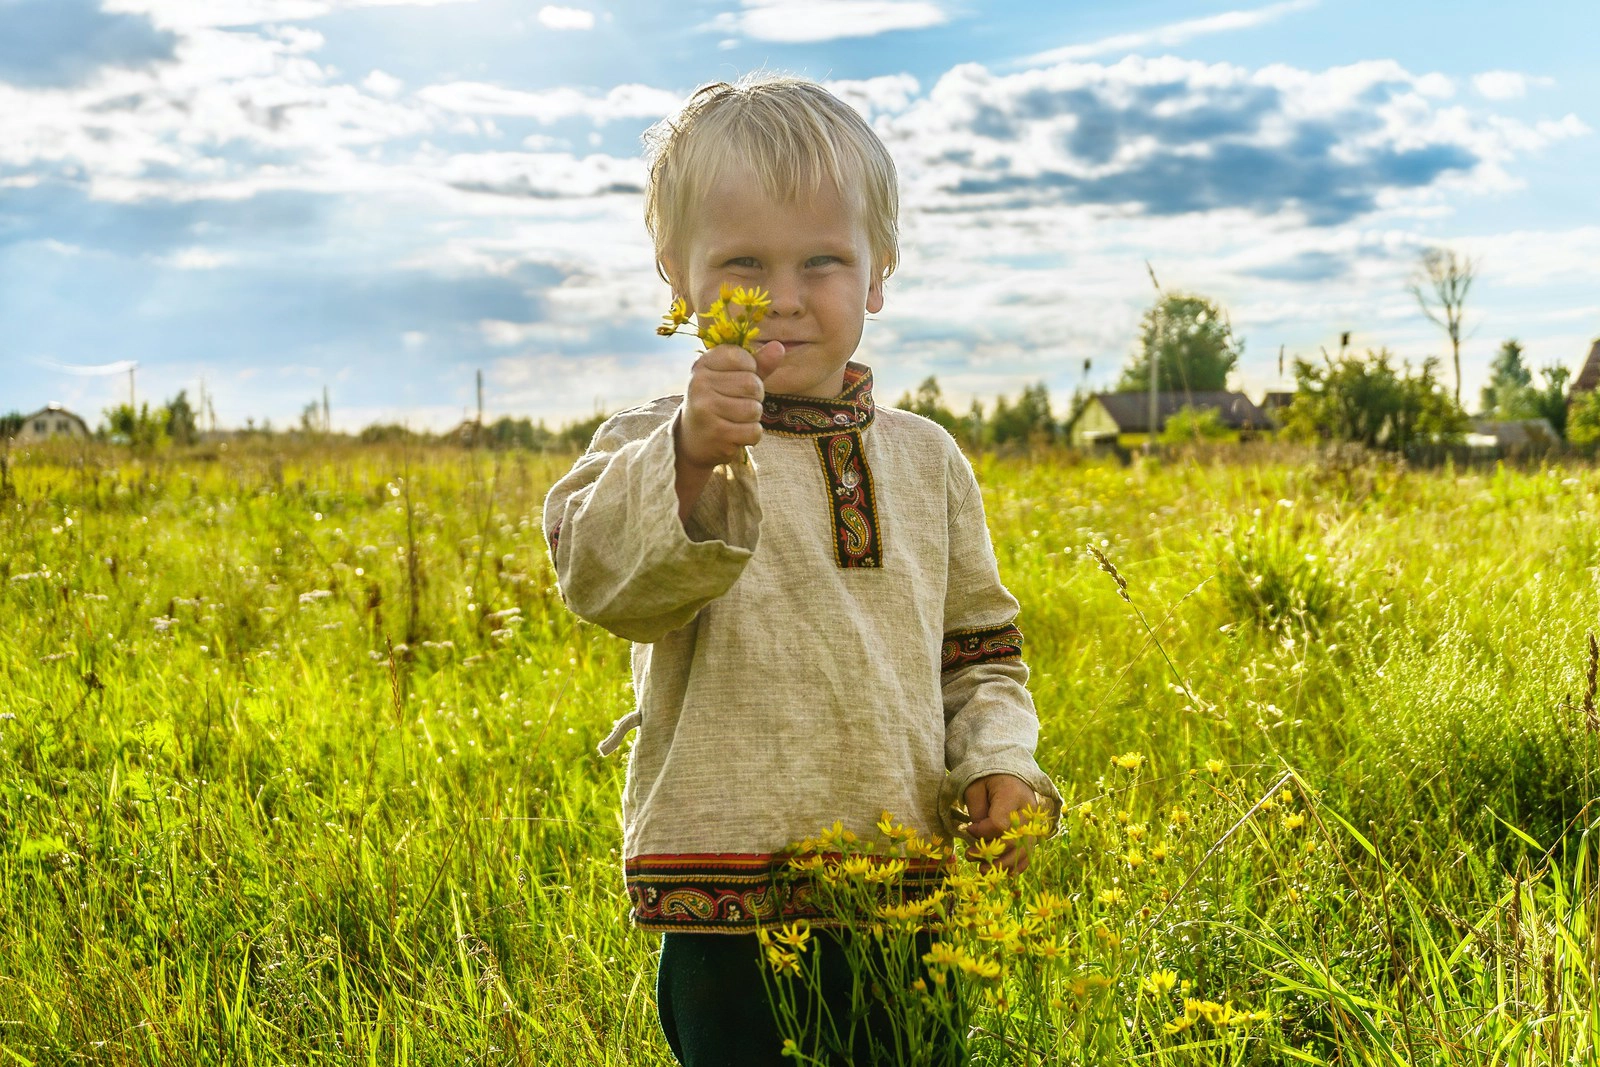 A boy in a gray sweater standing on a green grass field during the daytime smiles as he holds a yellow flower